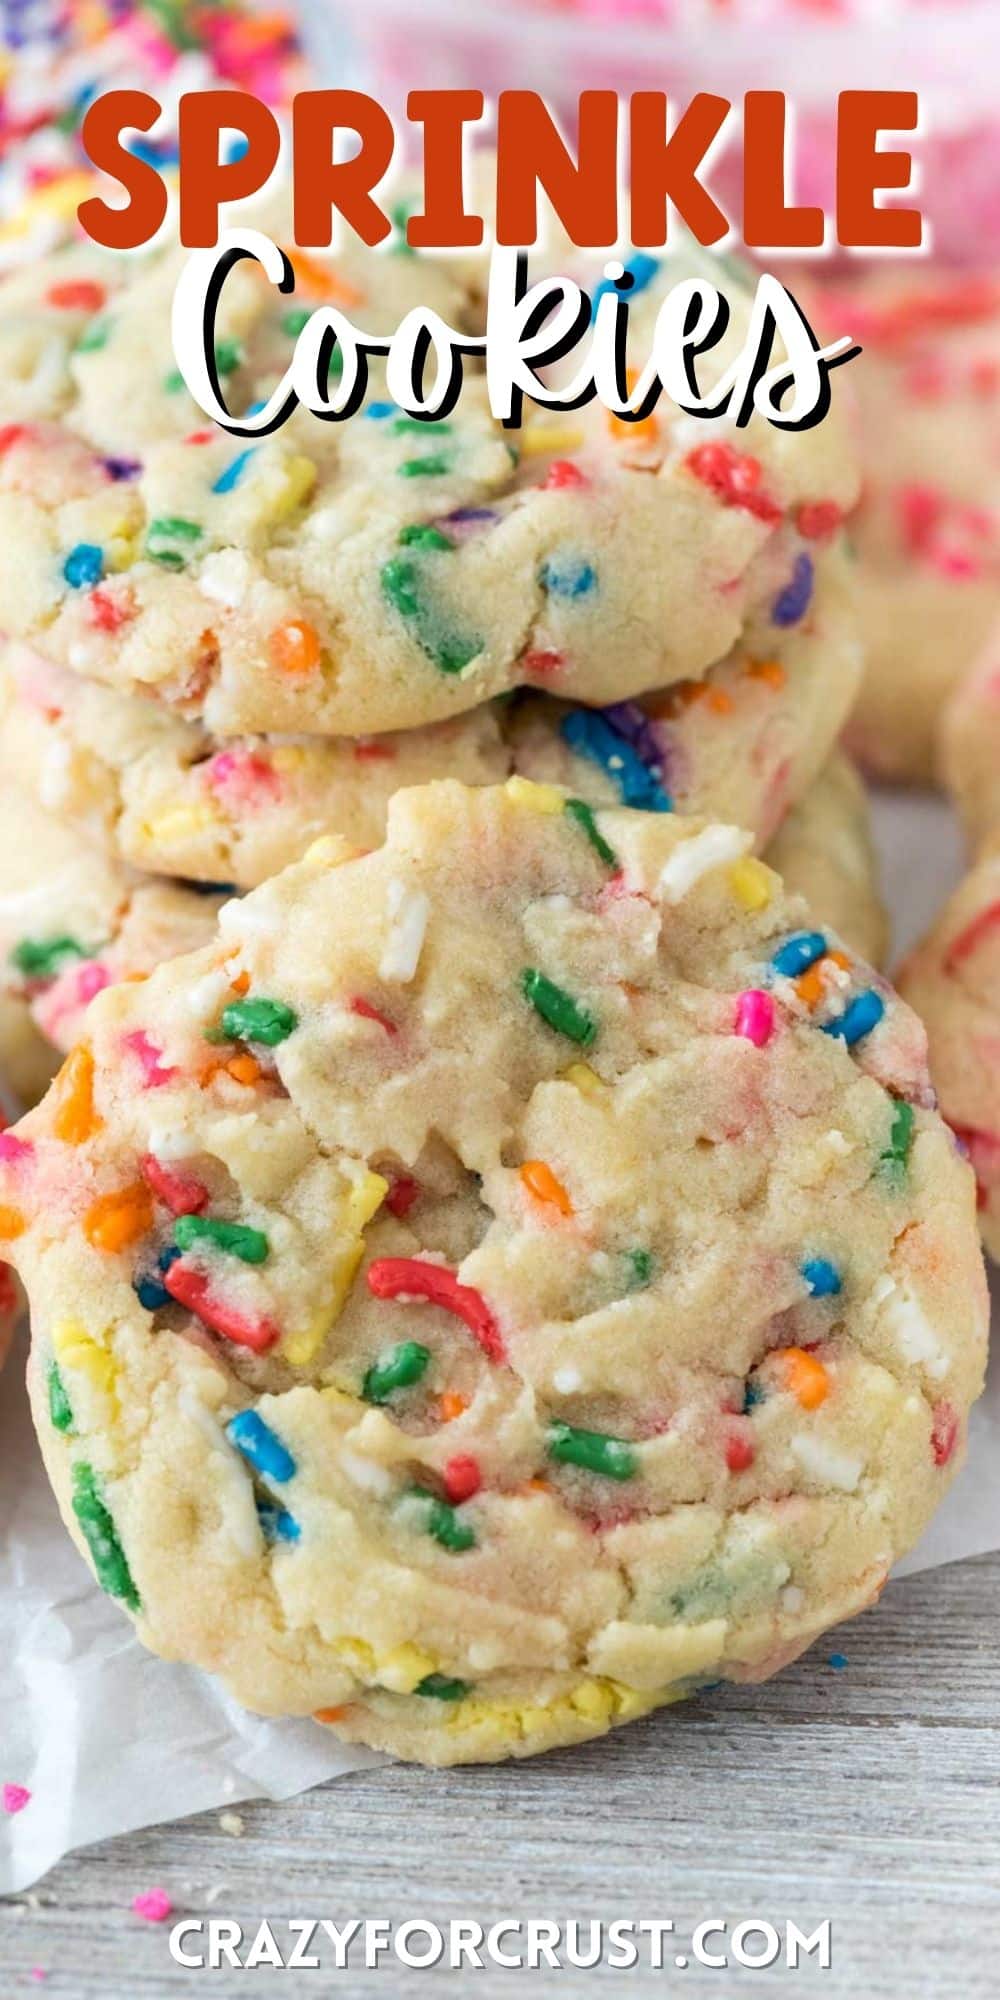 cookies with rainbow sprinkles baked inside and words on top